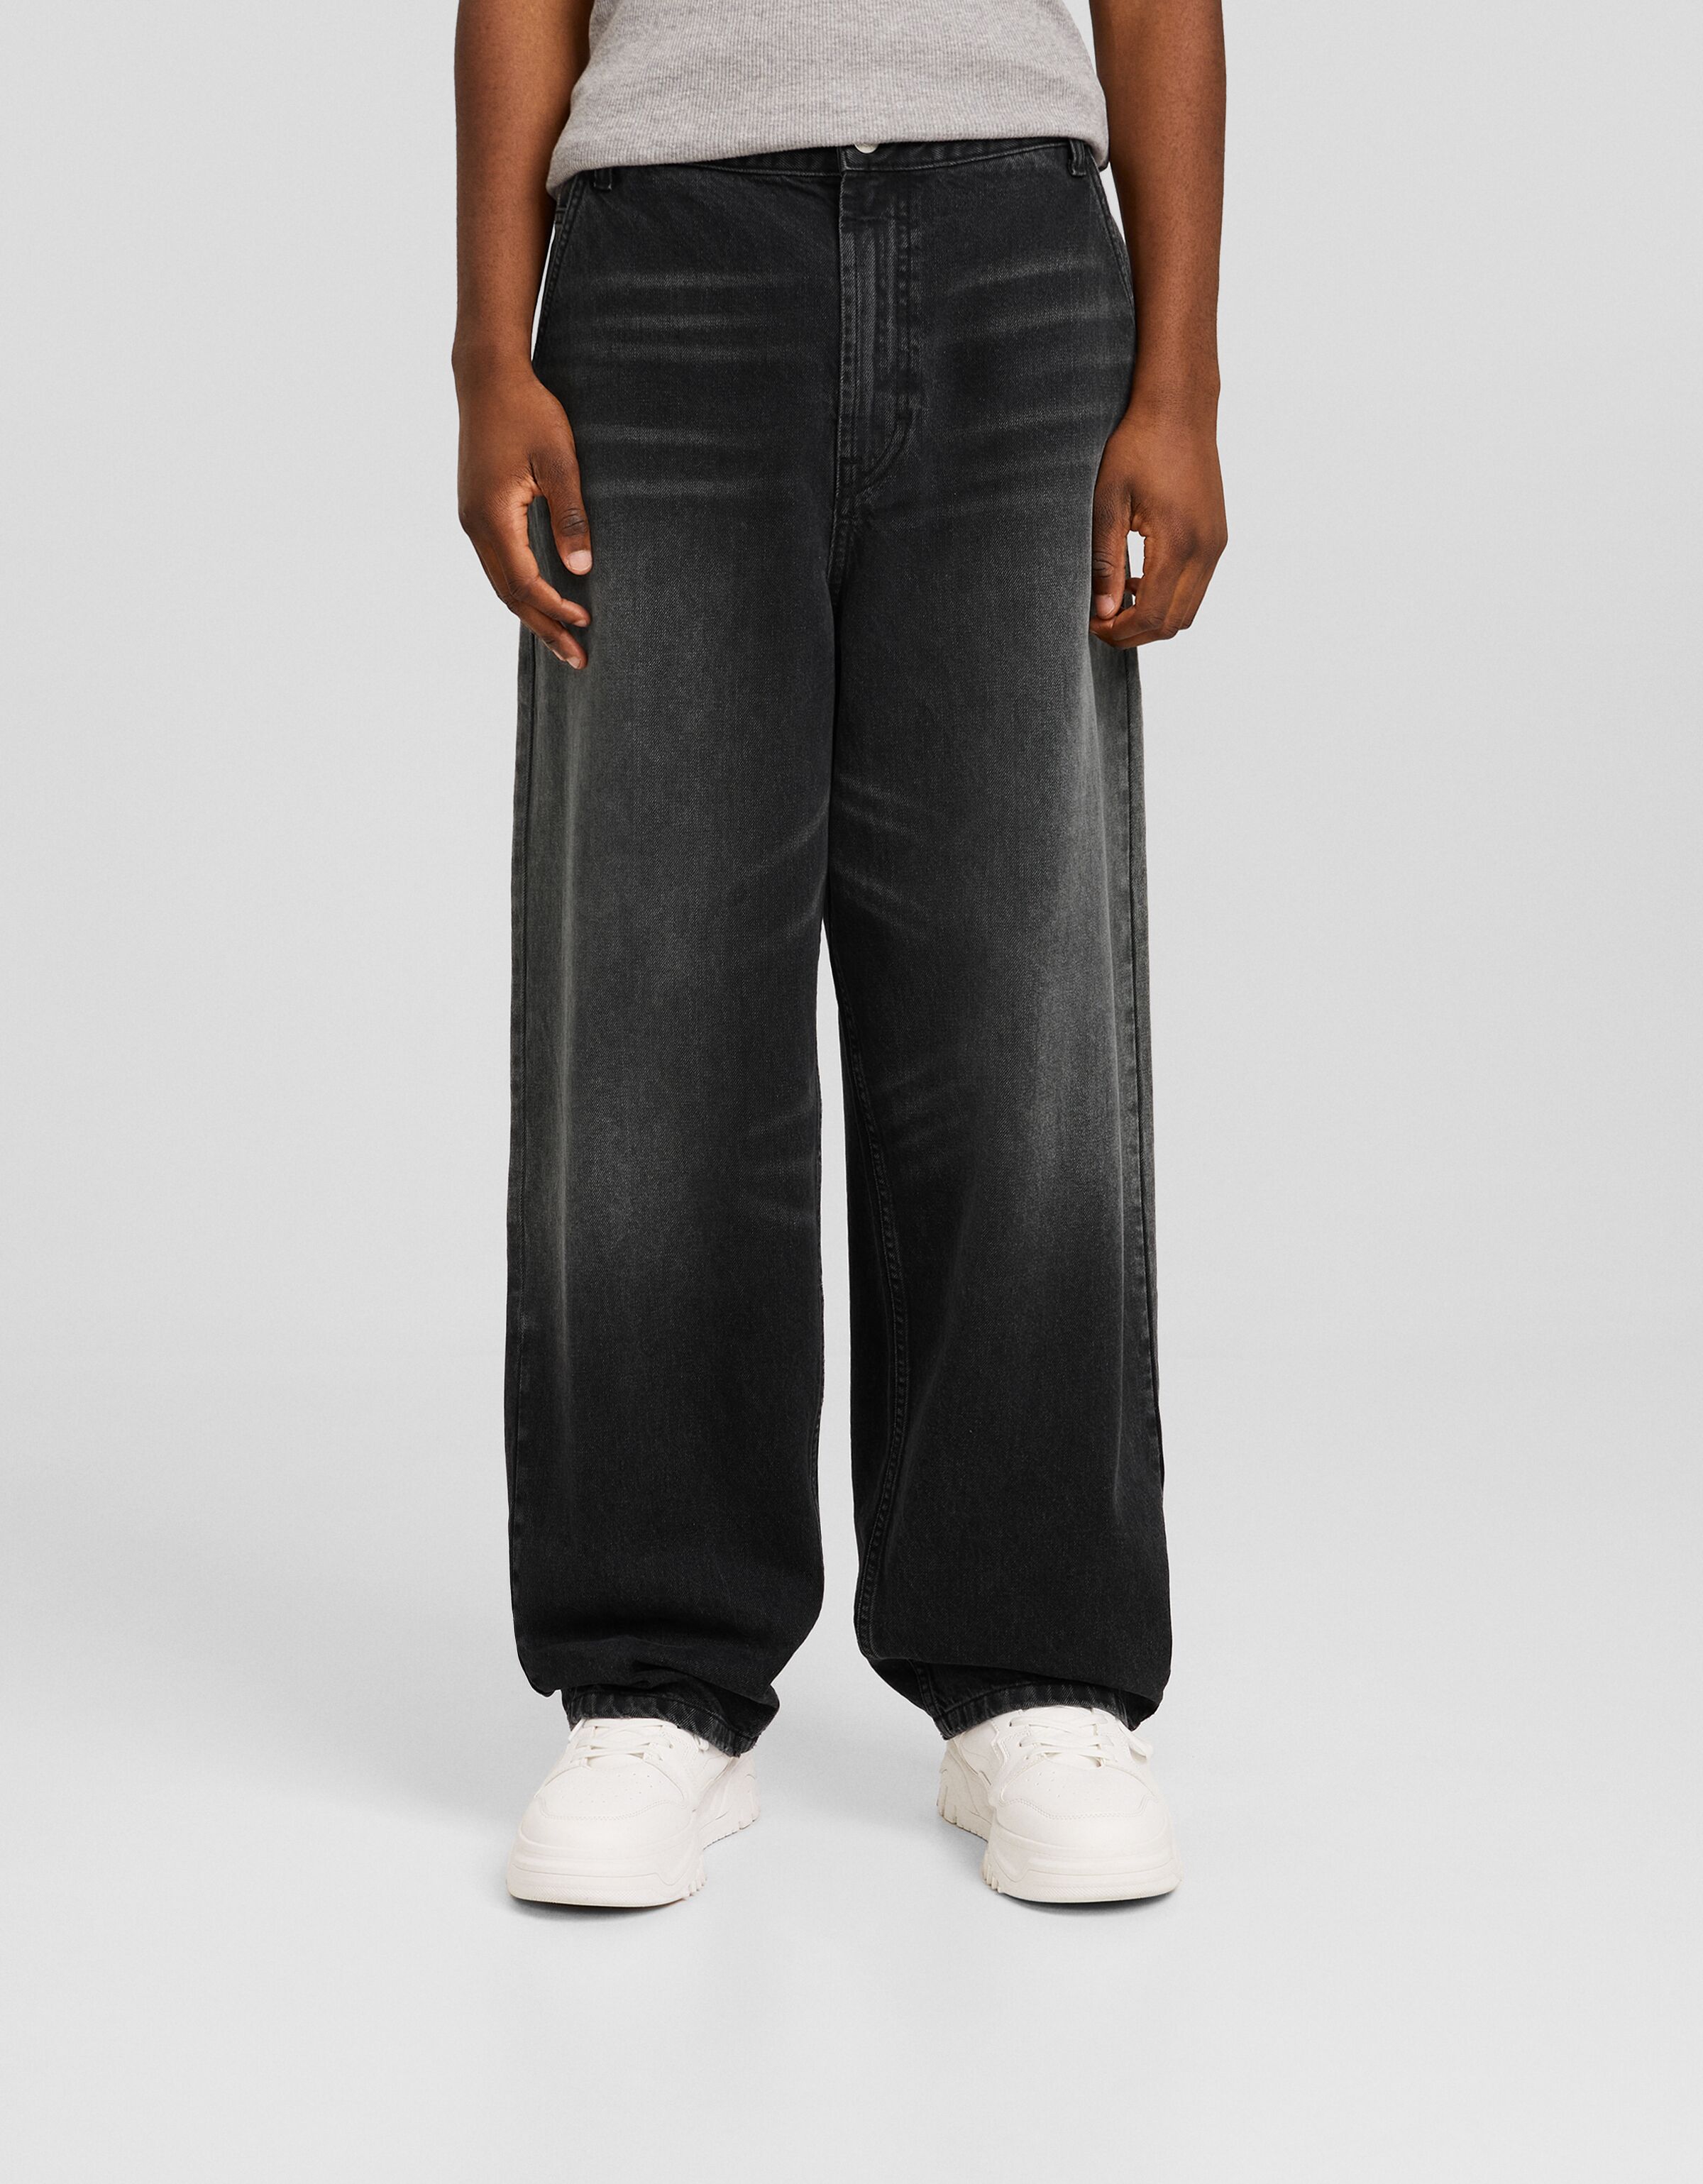 Faded skater jeans - Party Collection - Men | Bershka